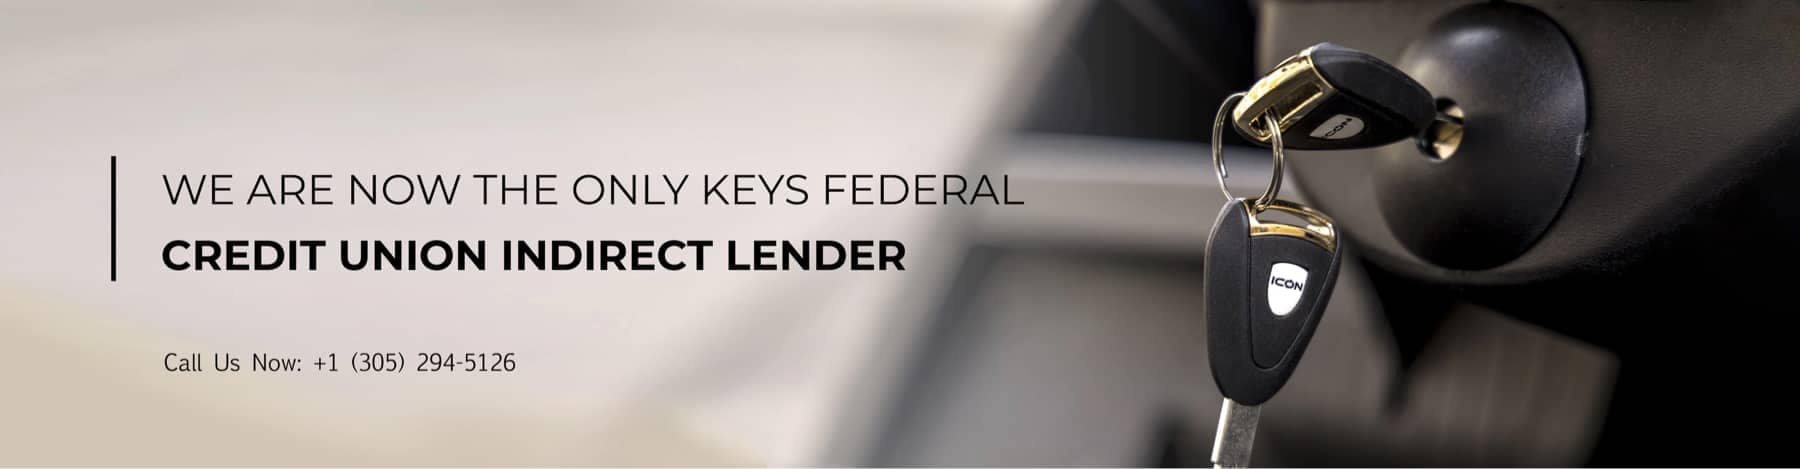 We are now the only Keys Federal Credit Union Indirect Lender